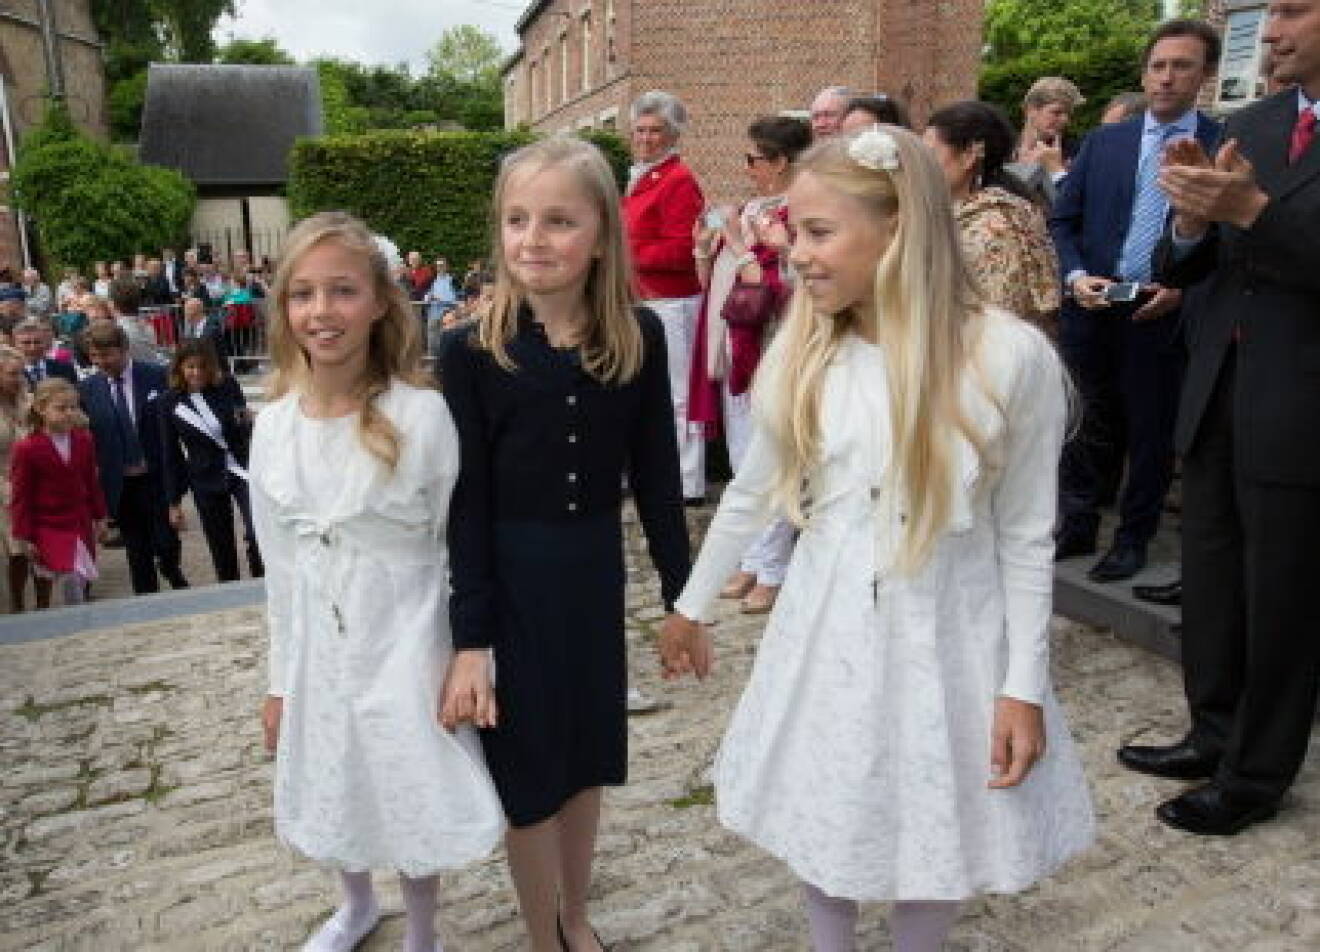 First communion of twin princes Nicolas and Aymeric of Belgium